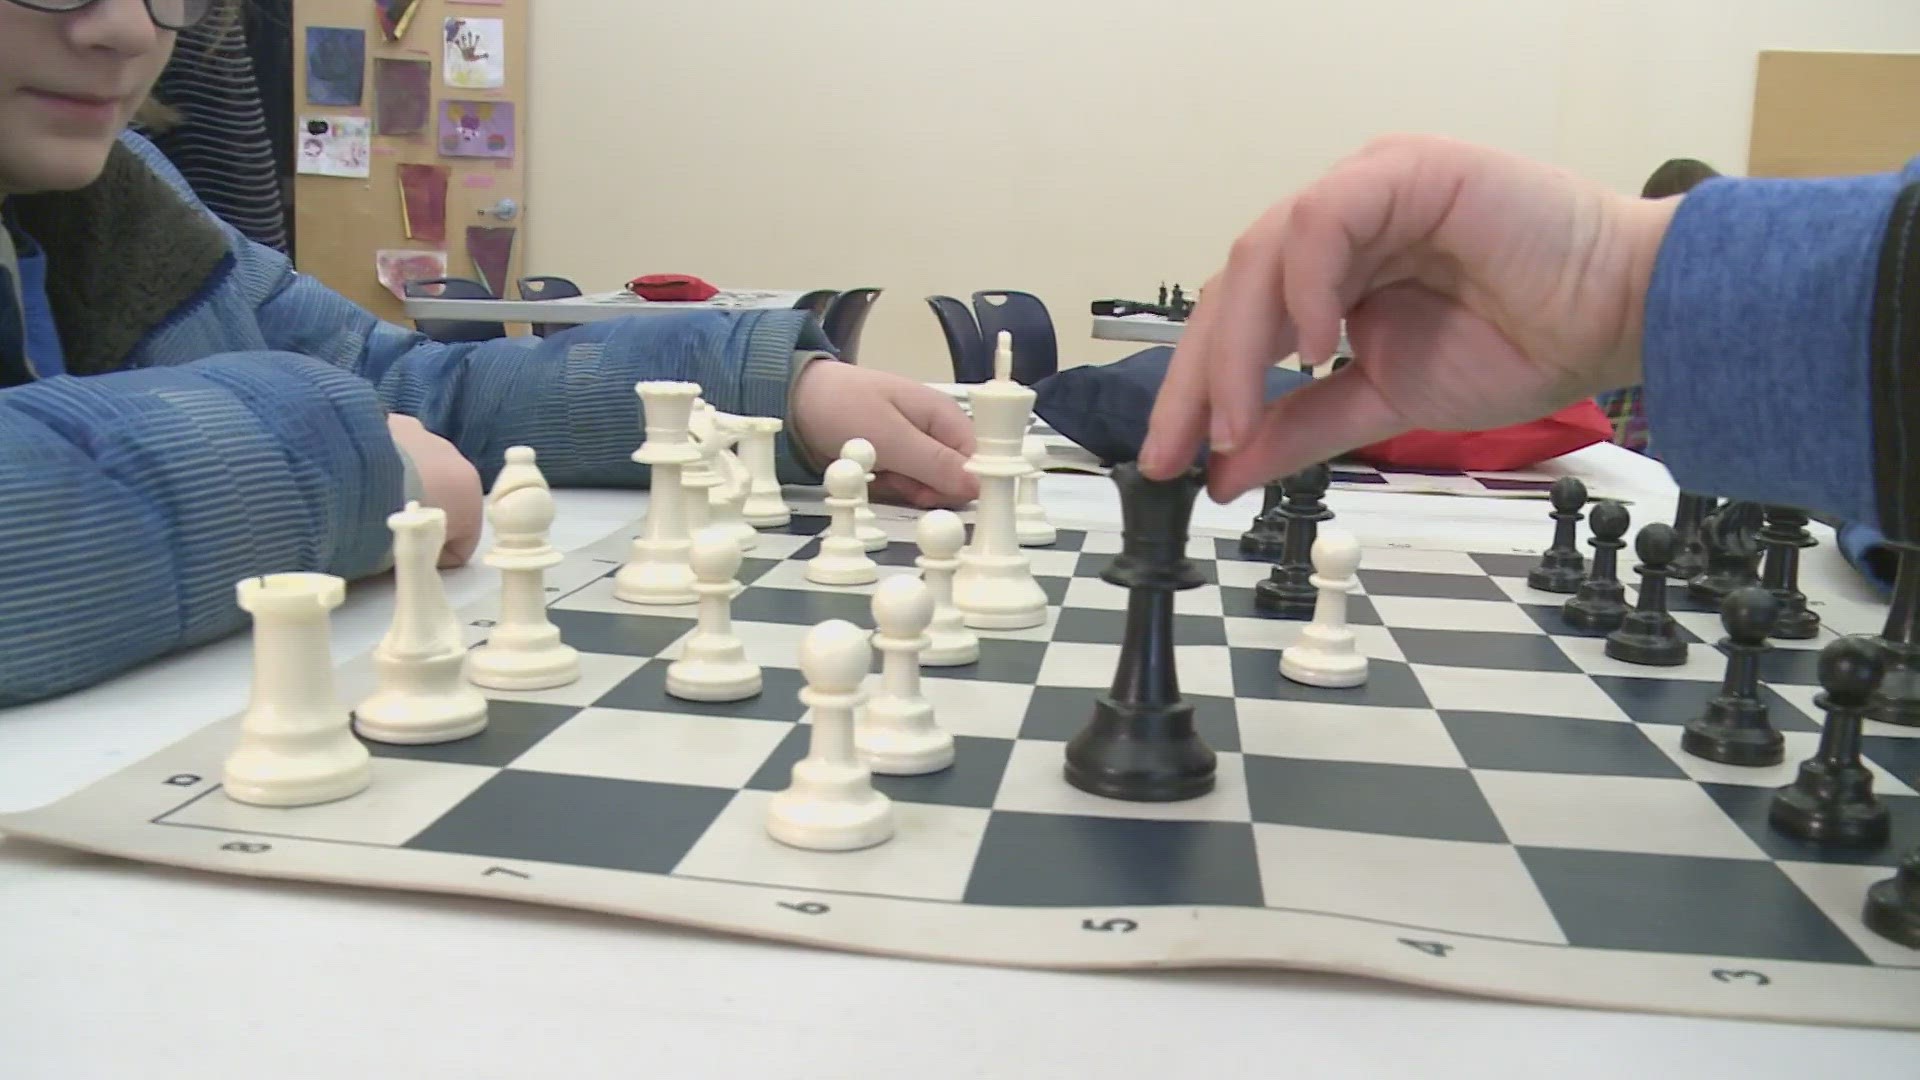 Bruce Haffner focuses his time on teaching chess to students in four Maine school districts. It's a game he says can help students develop many lifelong lessons.